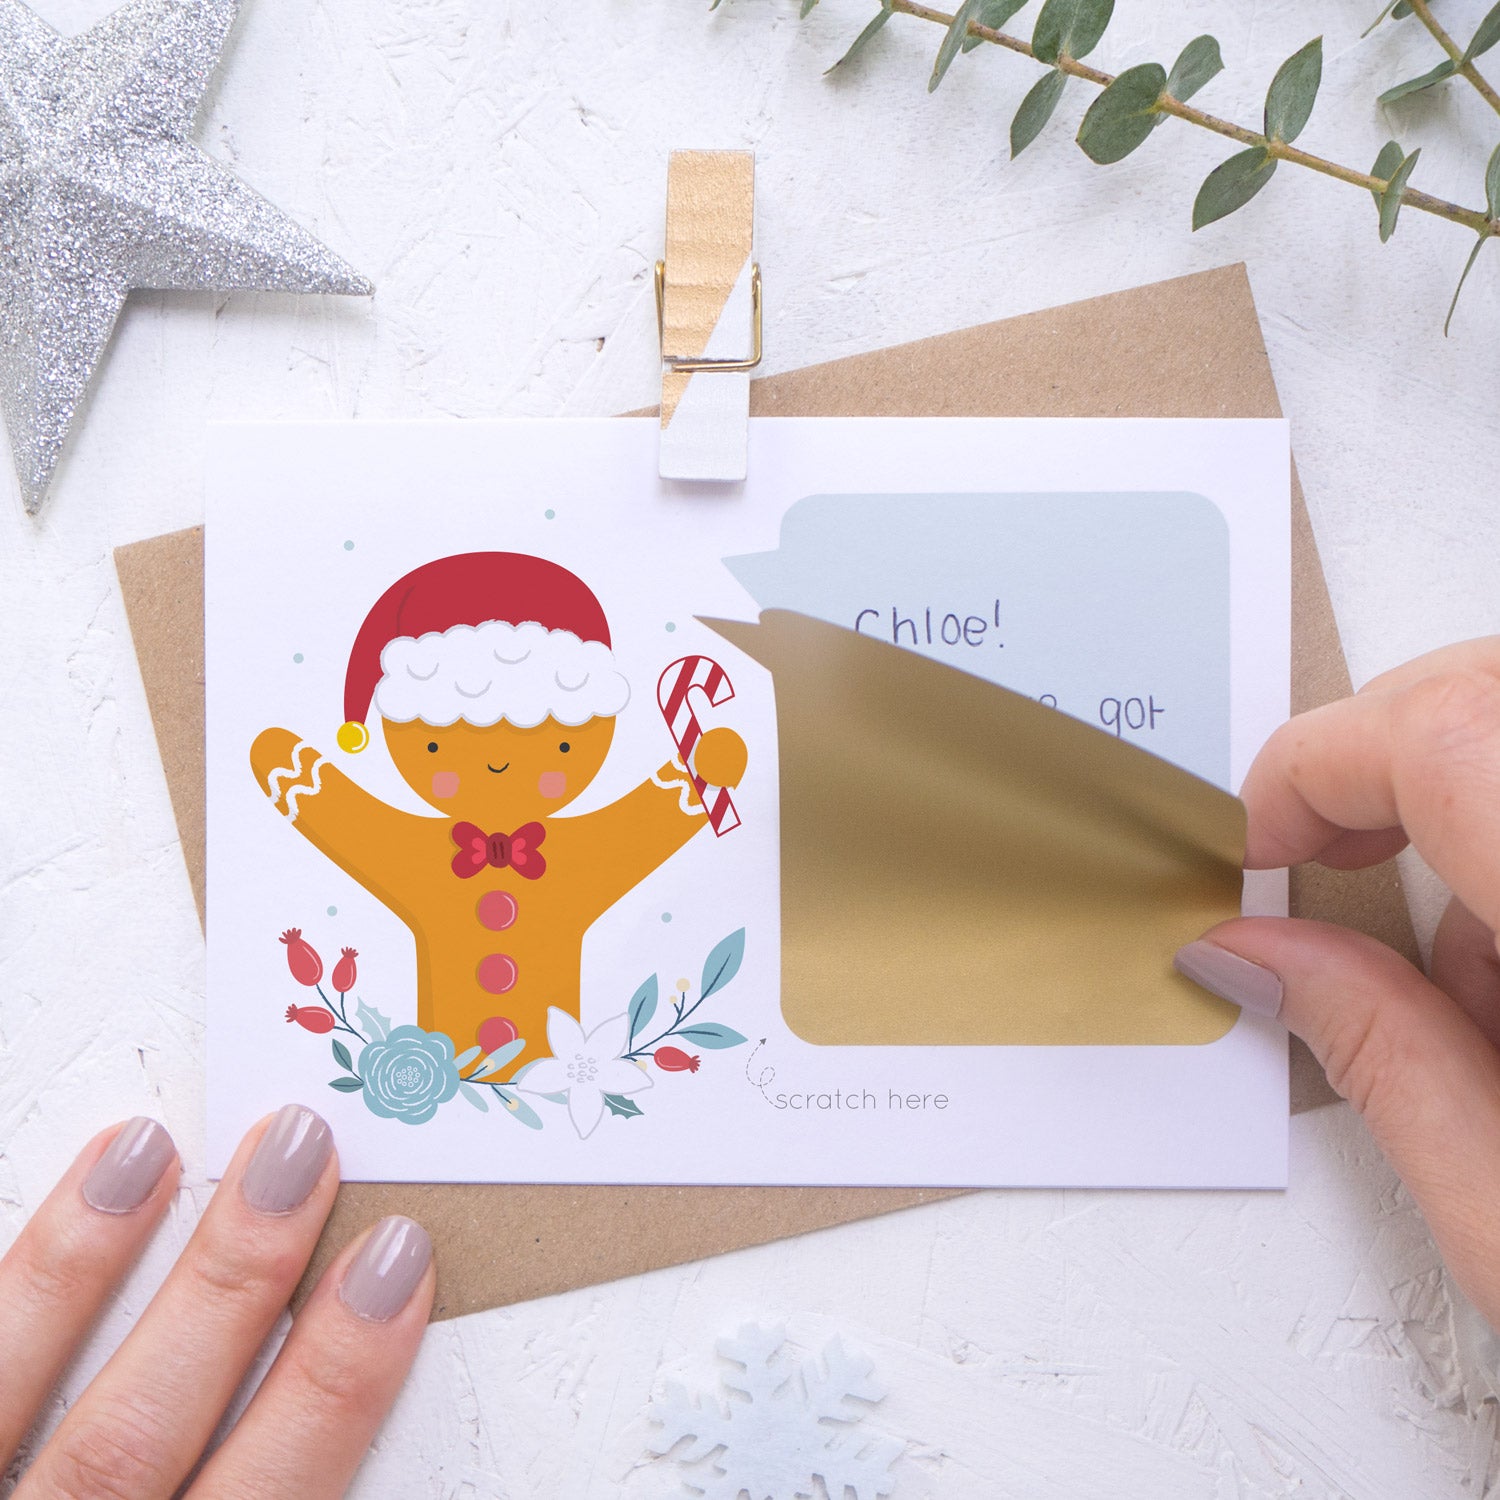 A personalised gingerbread man scratch card where the sticking down of the gold scratch panel is being demonstrated. Shot on a white background with a glittery star and sprig of eucalyptus.